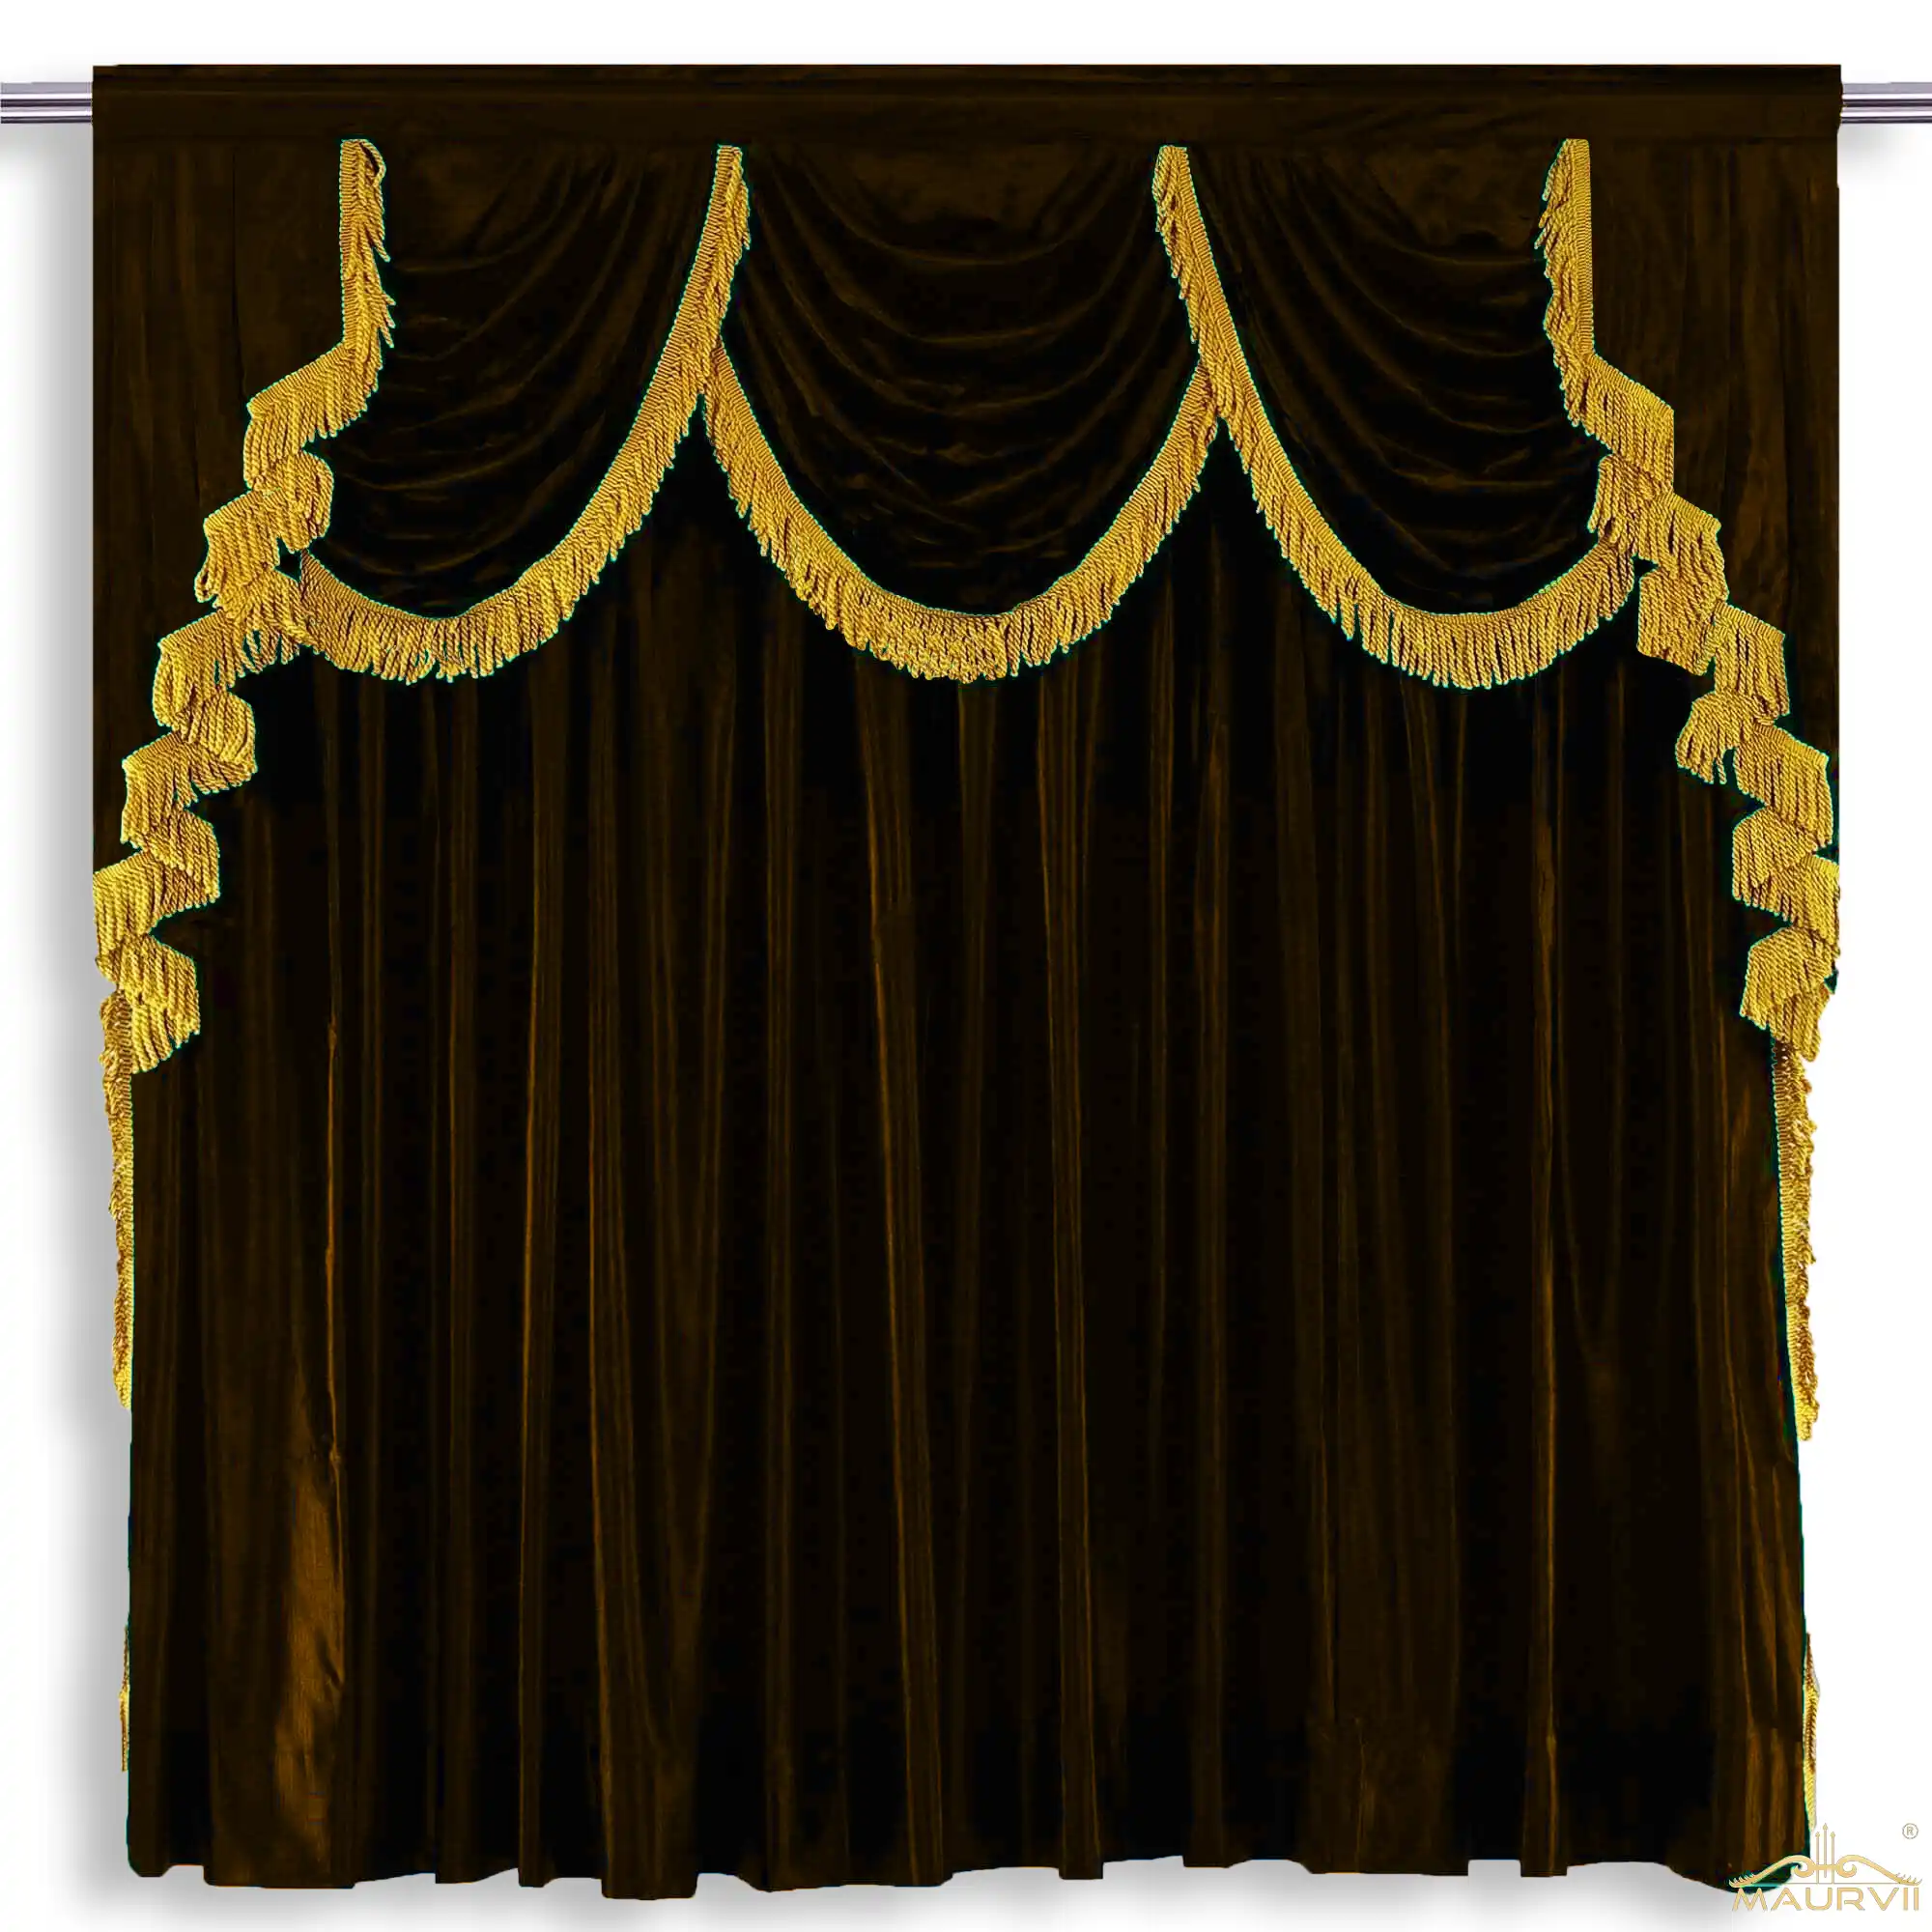 Brown stage curtains with bullion fringe